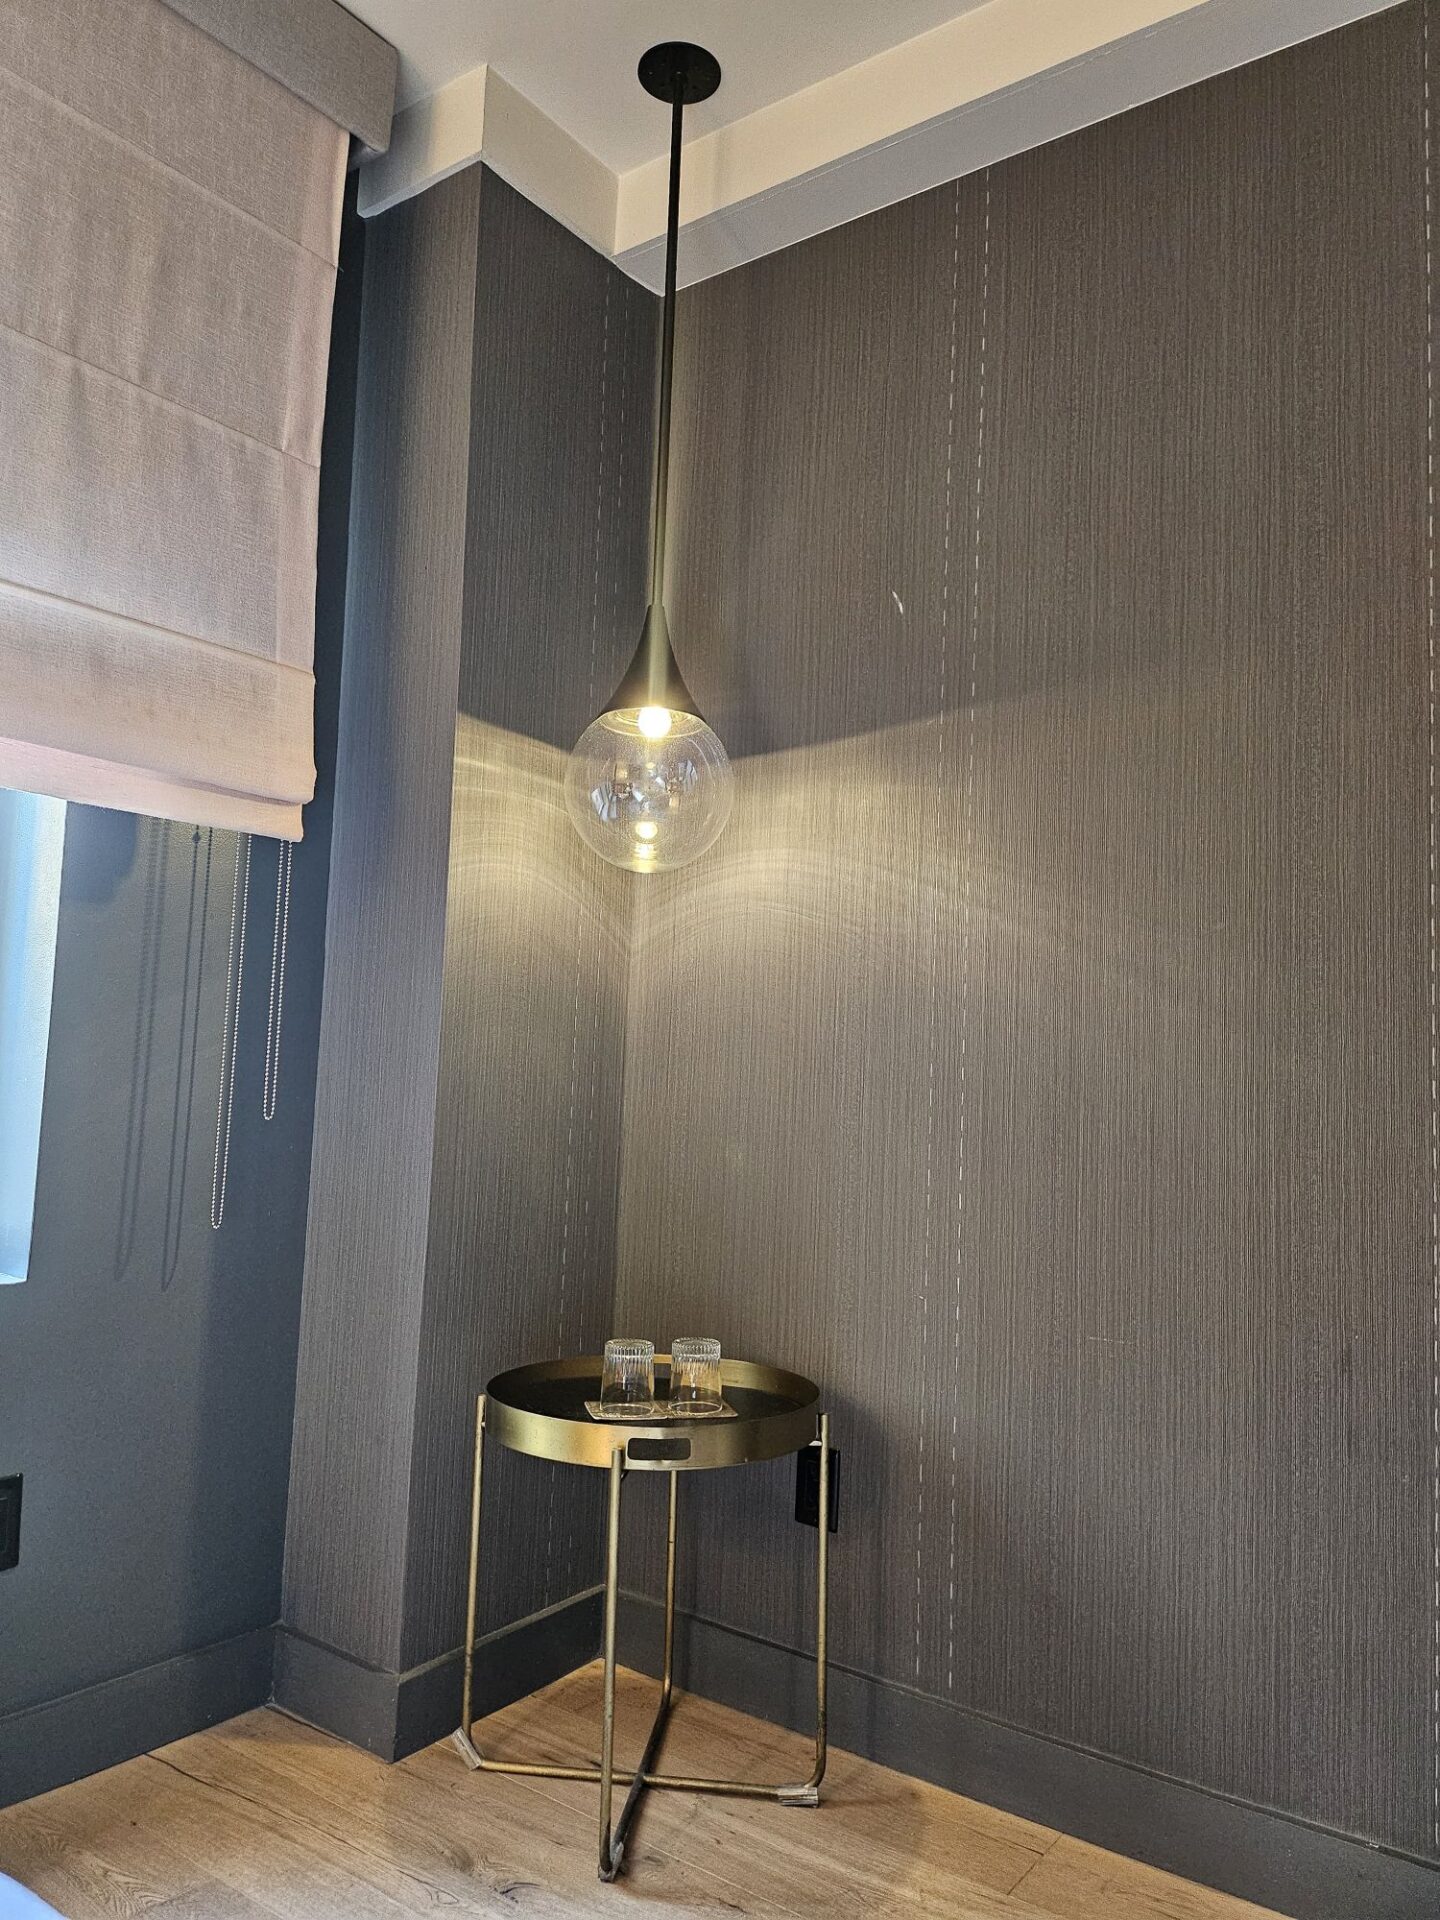 a small table with a glass light fixture from the ceiling